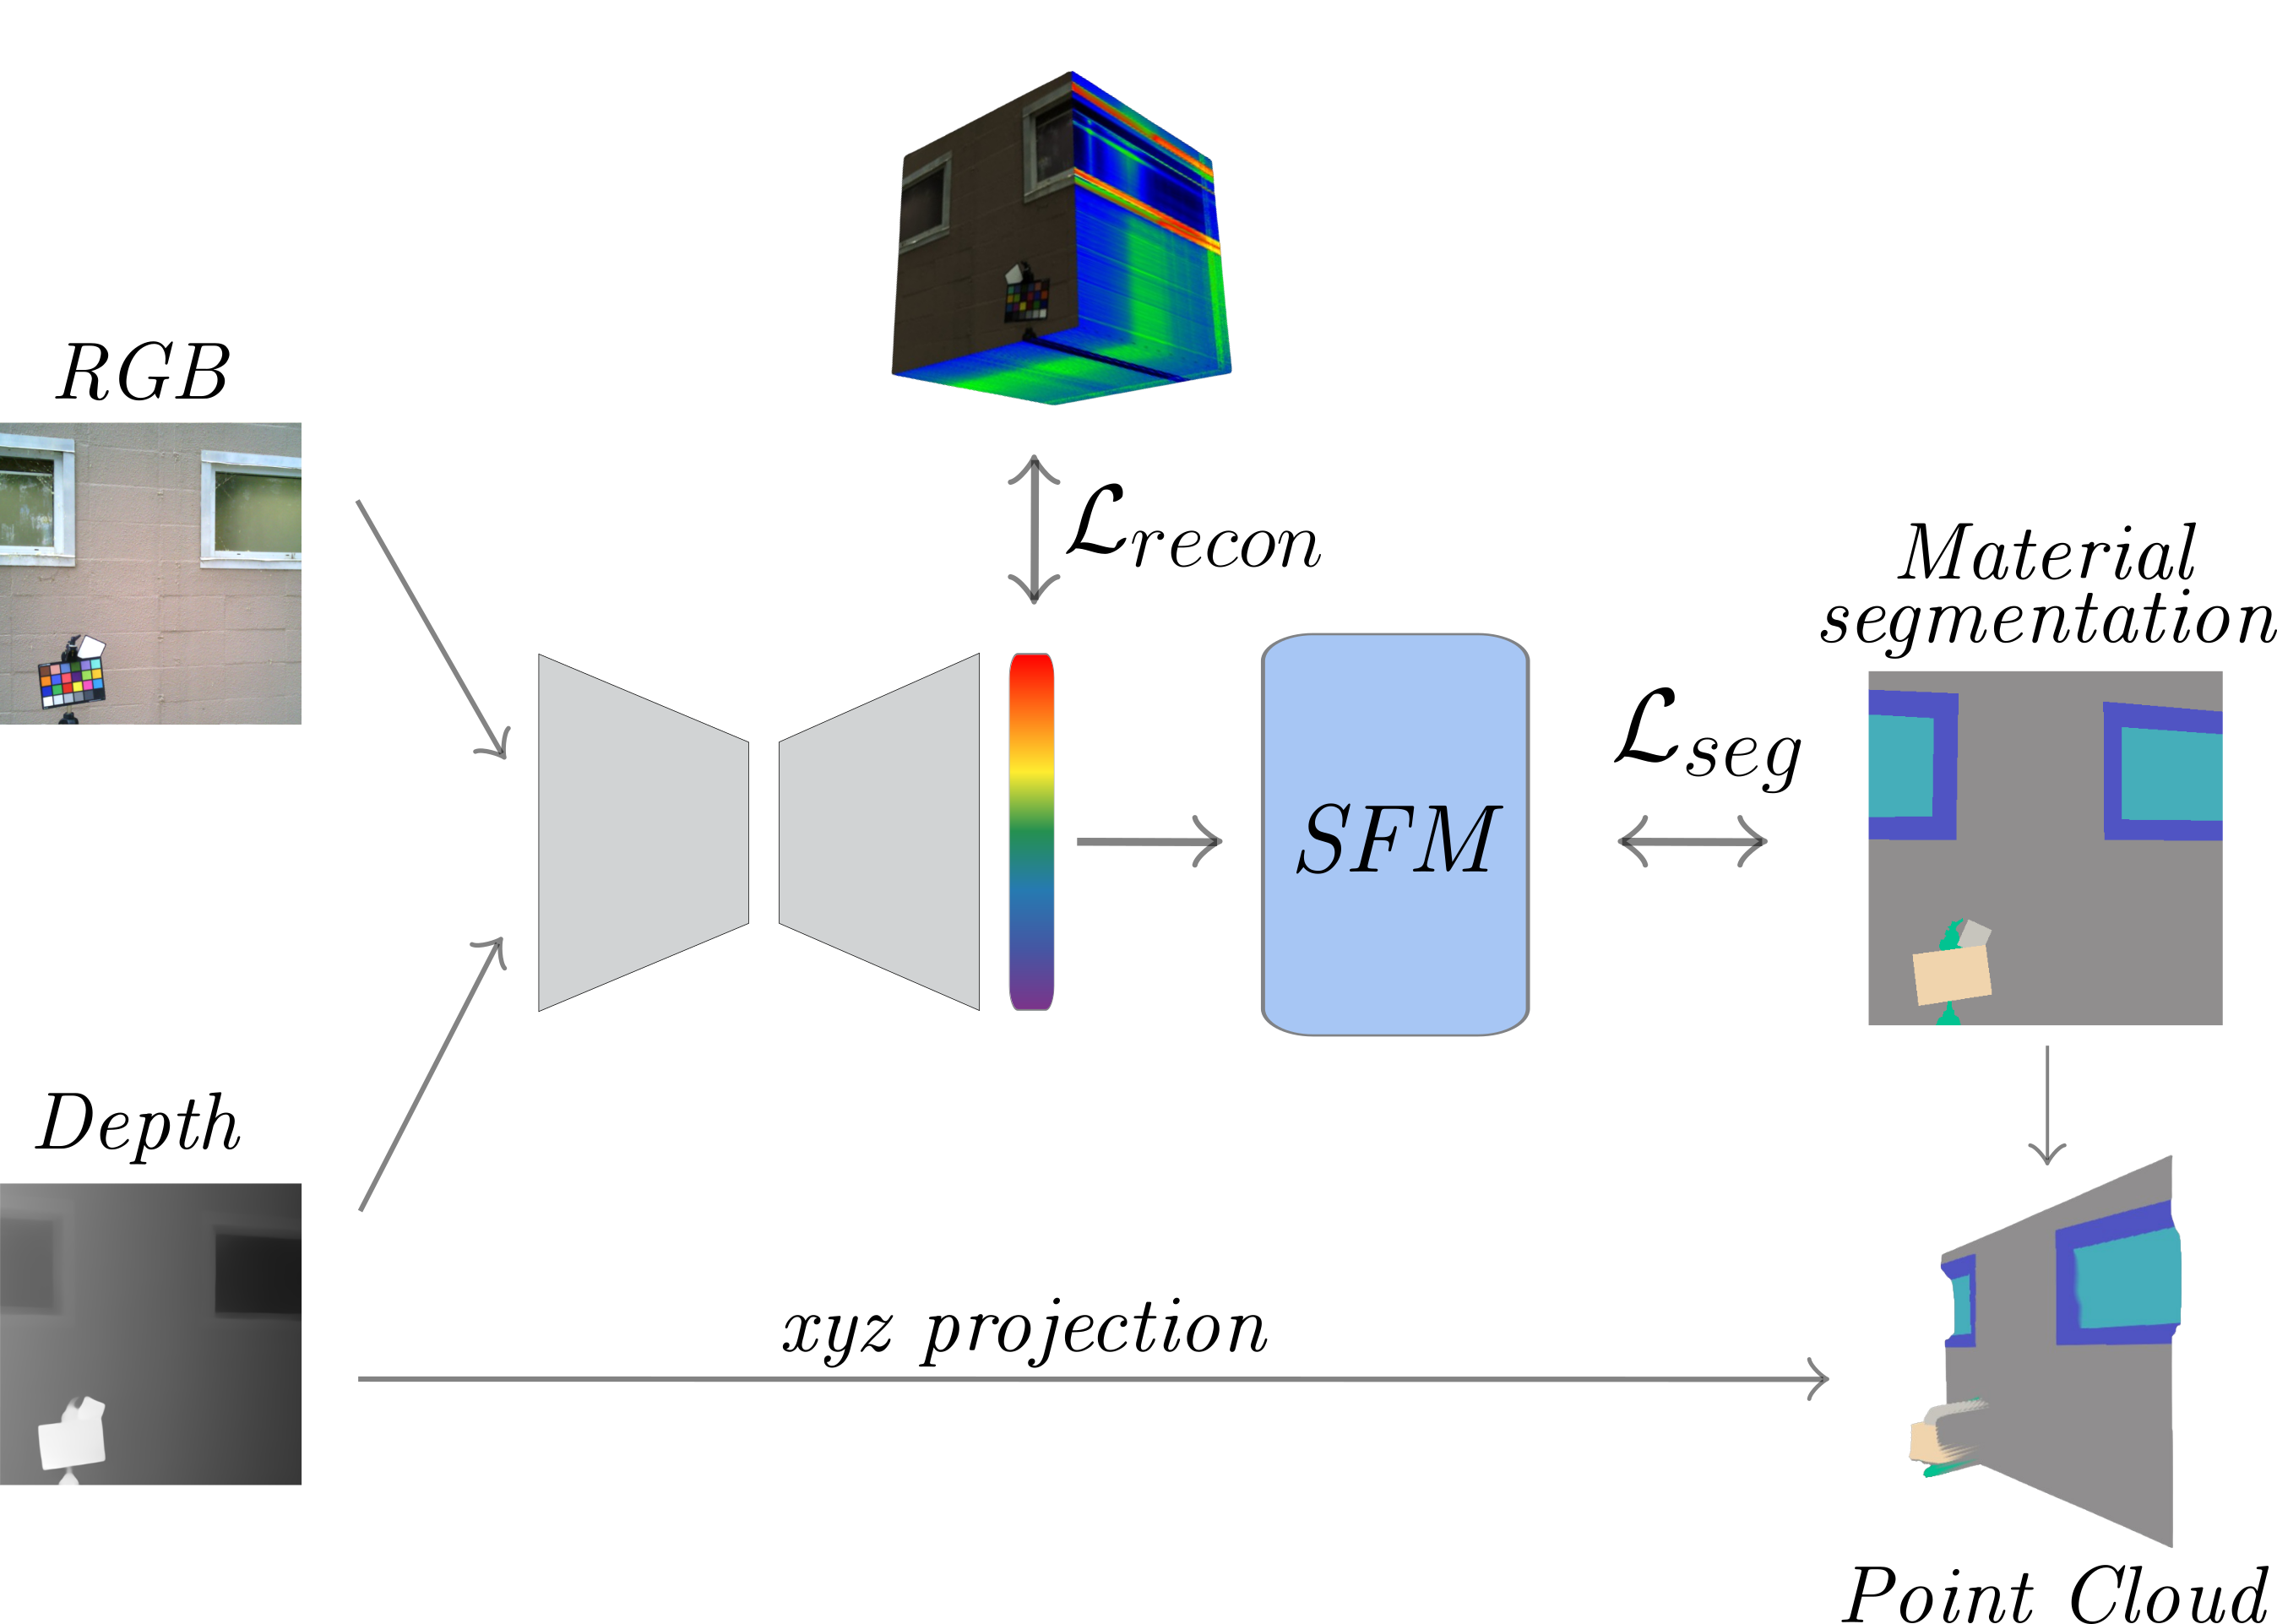 Beyond Appearances: Material Segmentation with Embedded Spectral Information from RGB-D imagery